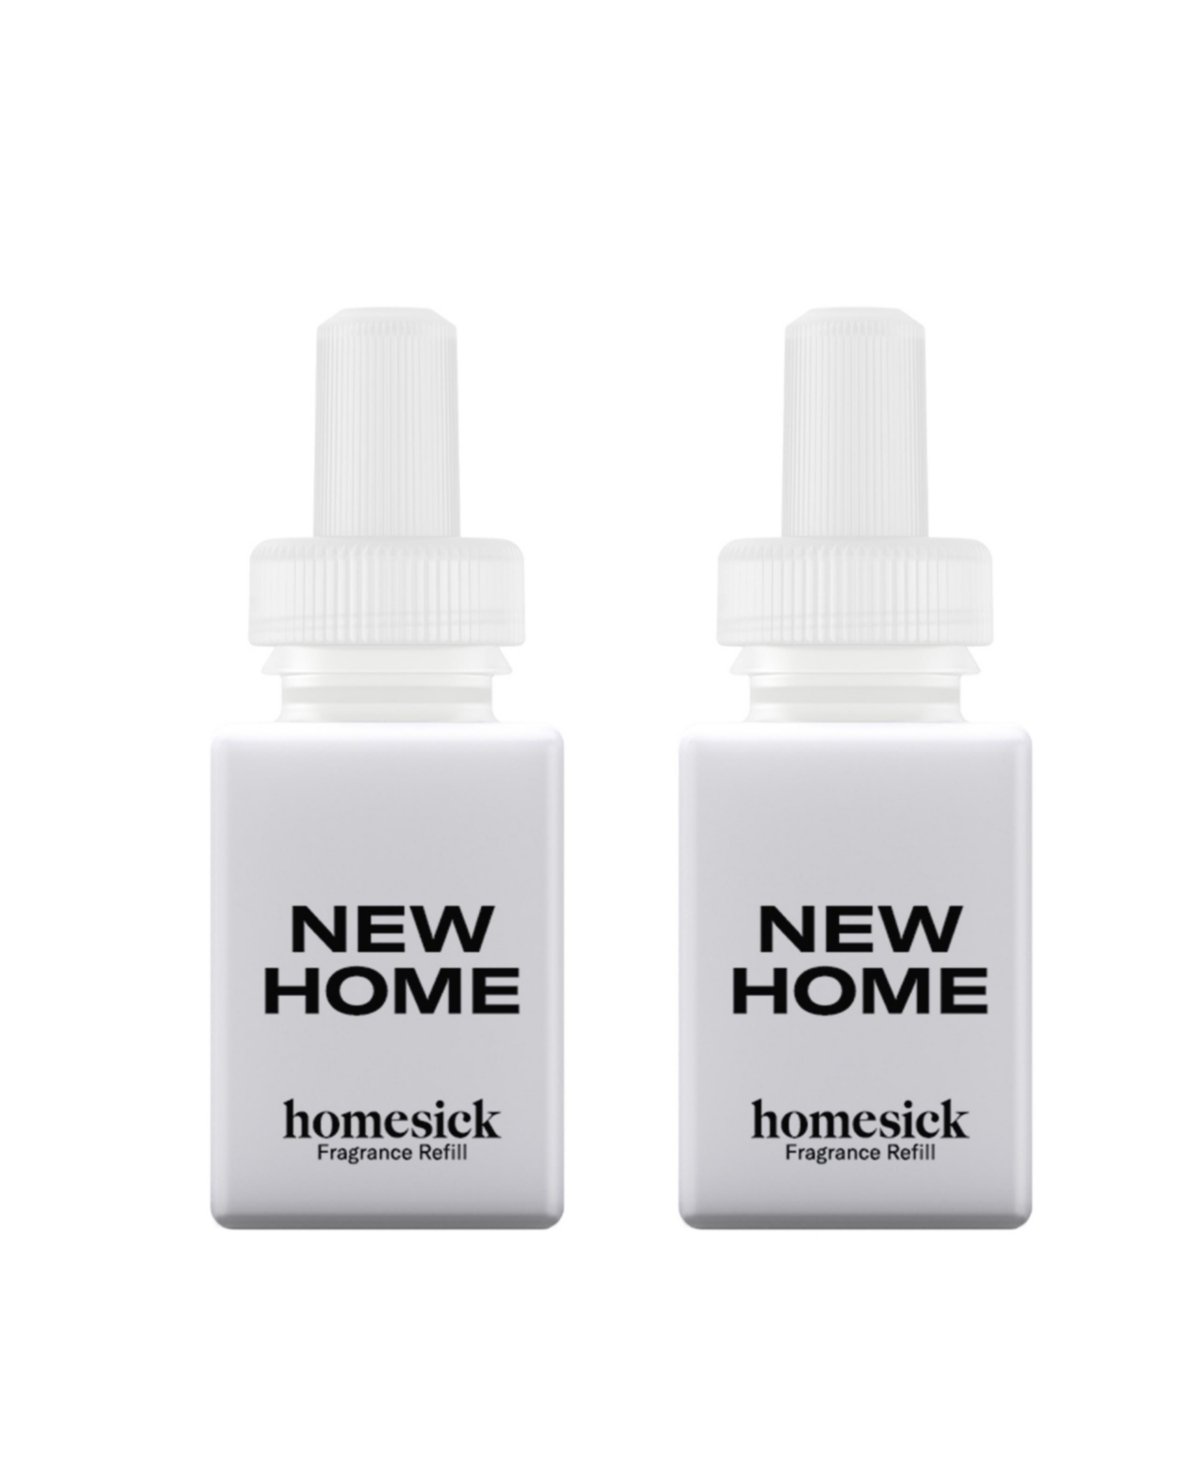 Homesick - New Home - Home Scent Refill - Smart Home Air Diffuser Fragrance - Up to 120-Hours of Luxury Fragrance per Refill - Clean & Safe Diffu